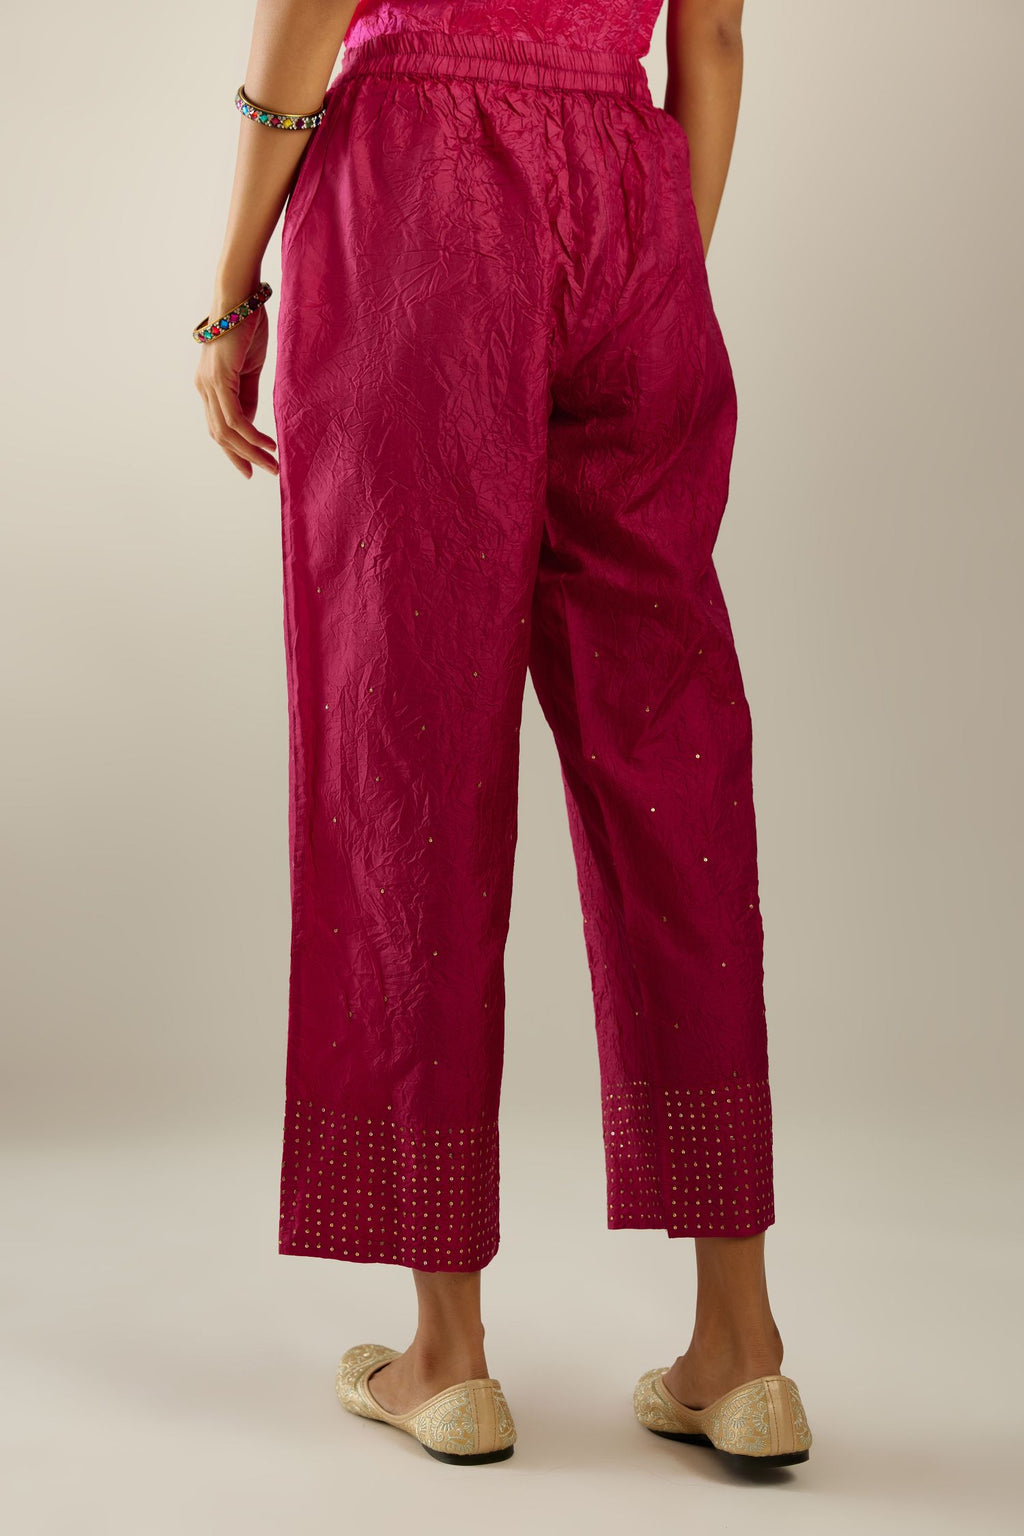 Jazzberry jam hand crushed silk straight pants detailed with gold sequins at hem and a single sequin buti is sprayed all over the pants and side pockets